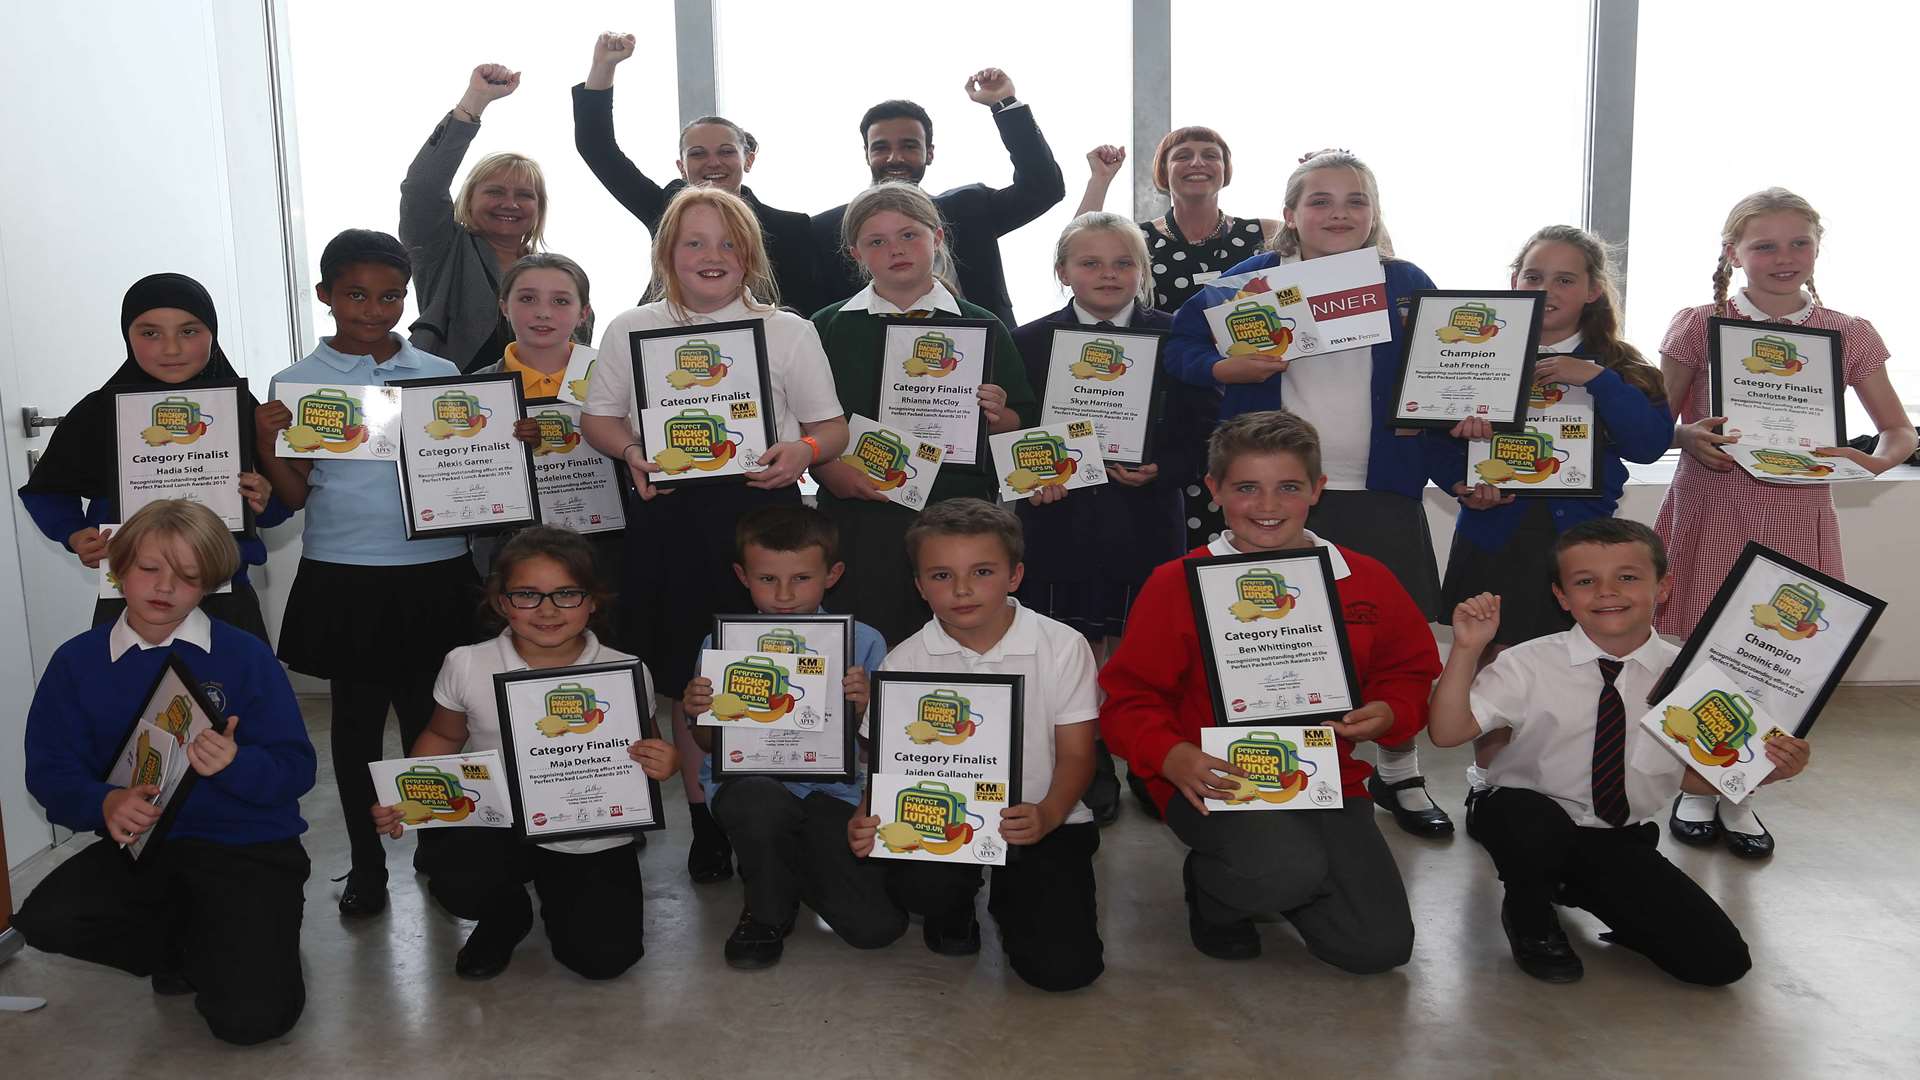 Perfect Packed Lunch Awards 2015 at Turner Contemporary, Margate. All finalists and winners with supporters from 3R's, Telcare and Art Projects For Schools.